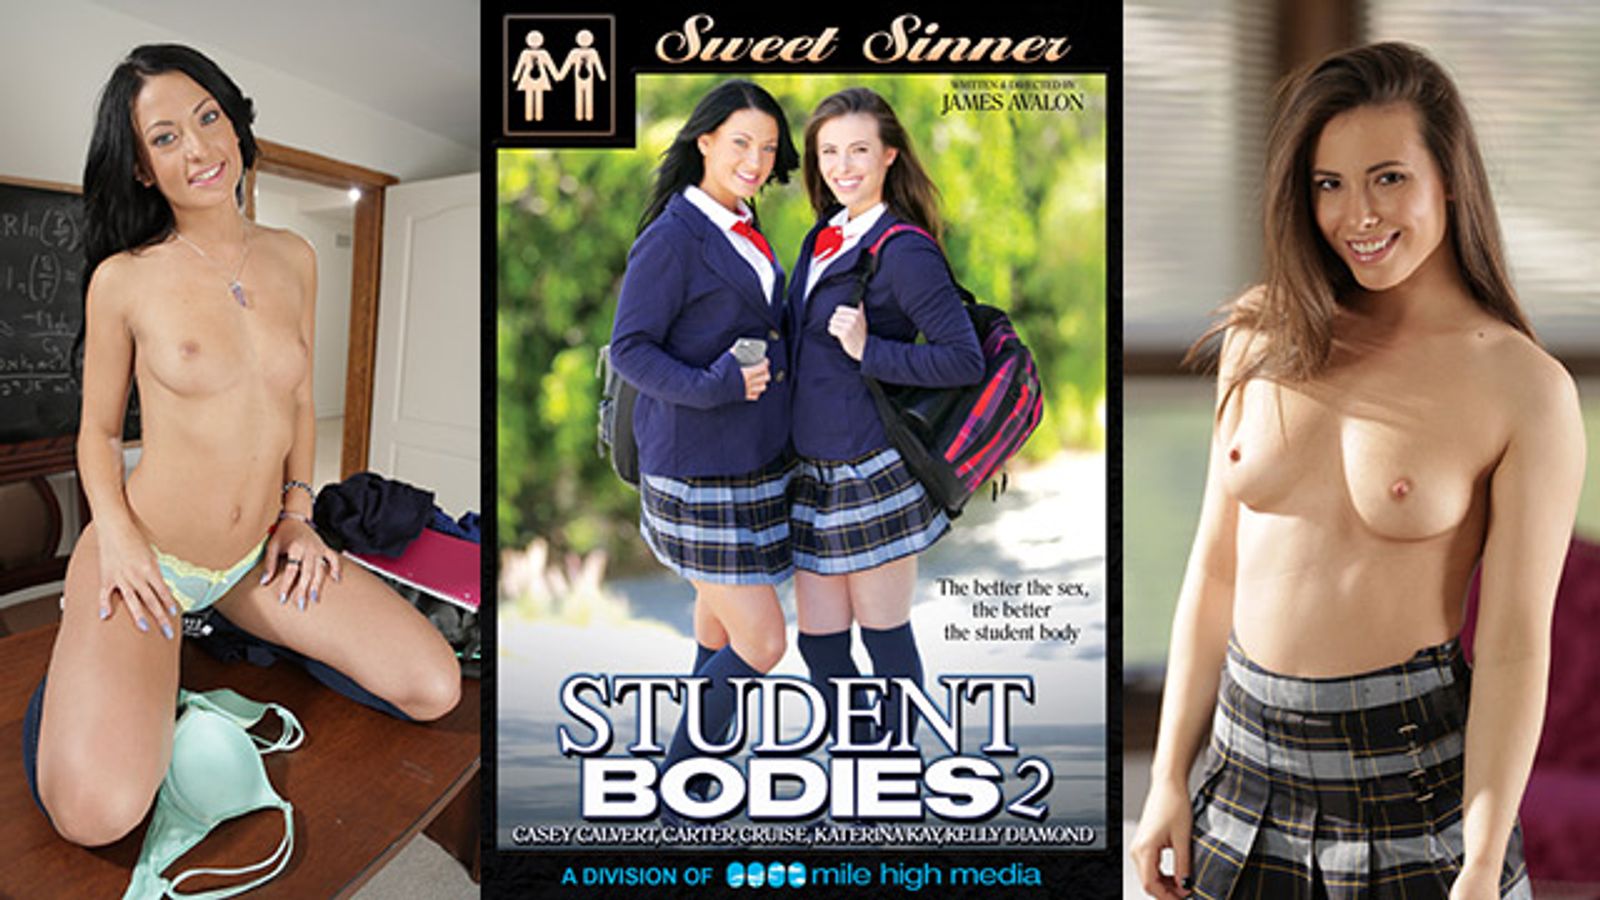 School’s In Session With Mile High Media’s ‘Student Bodies 2’